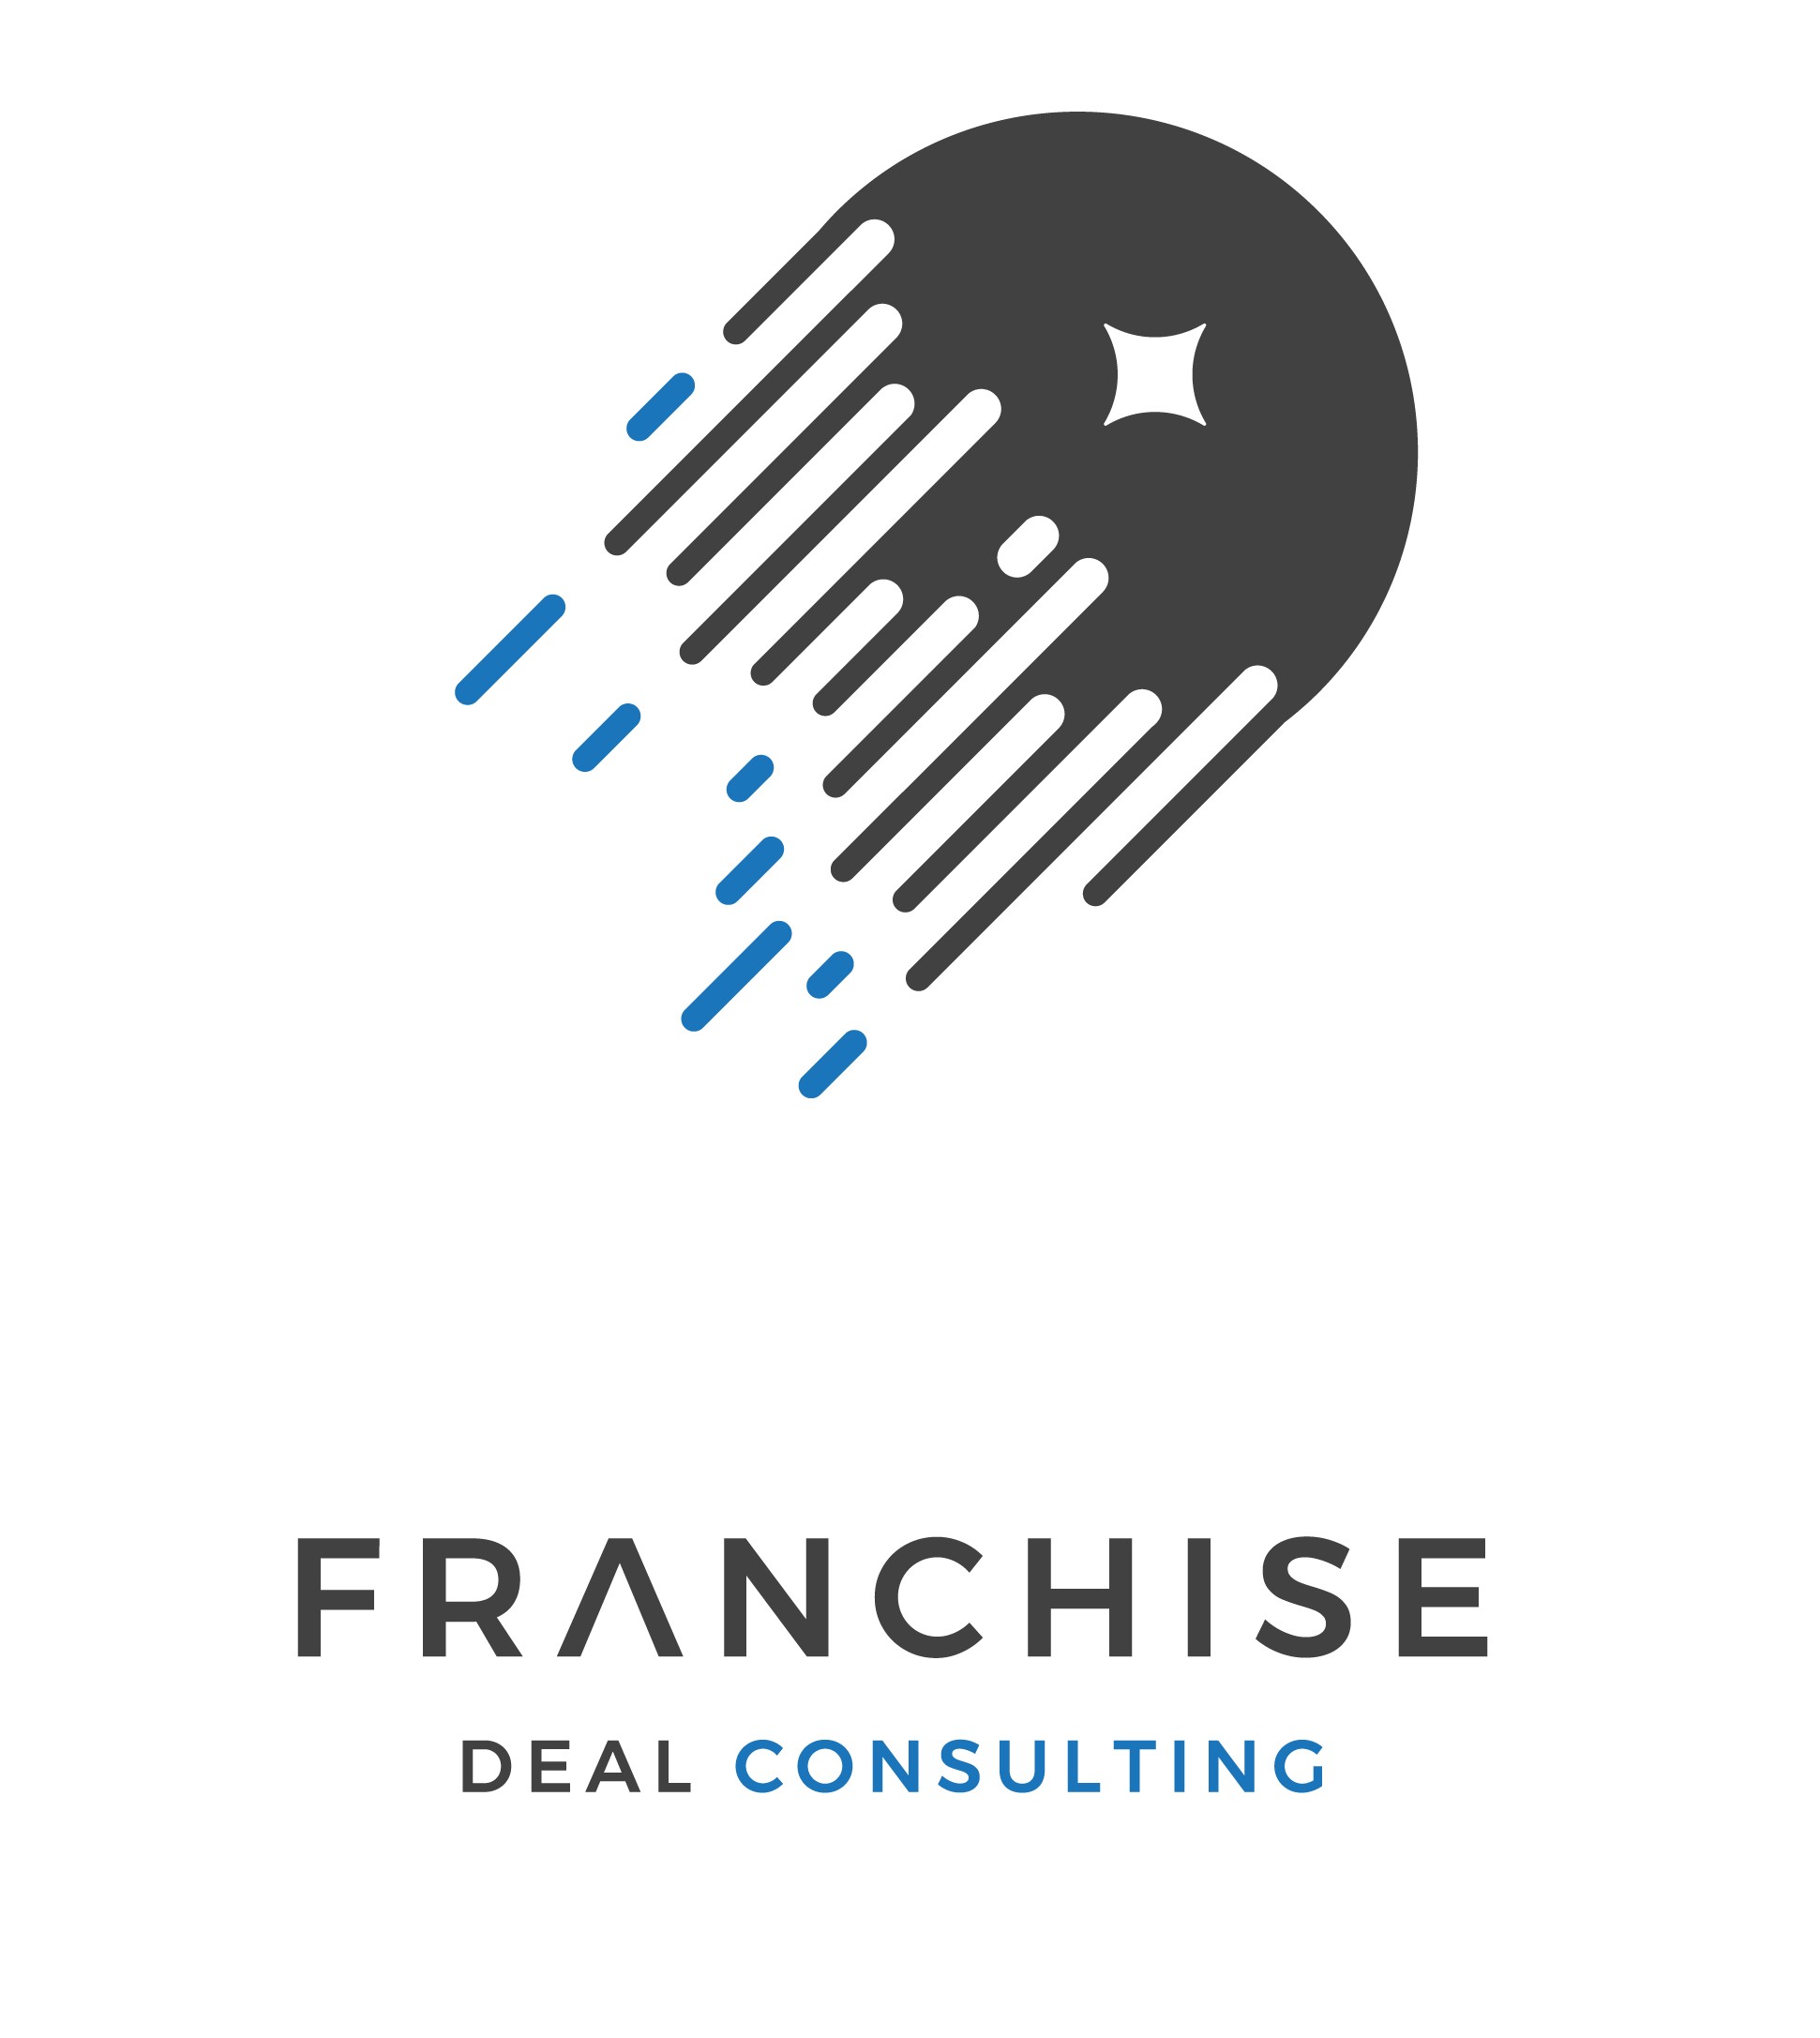 Franchise Deal Consulting - Financing